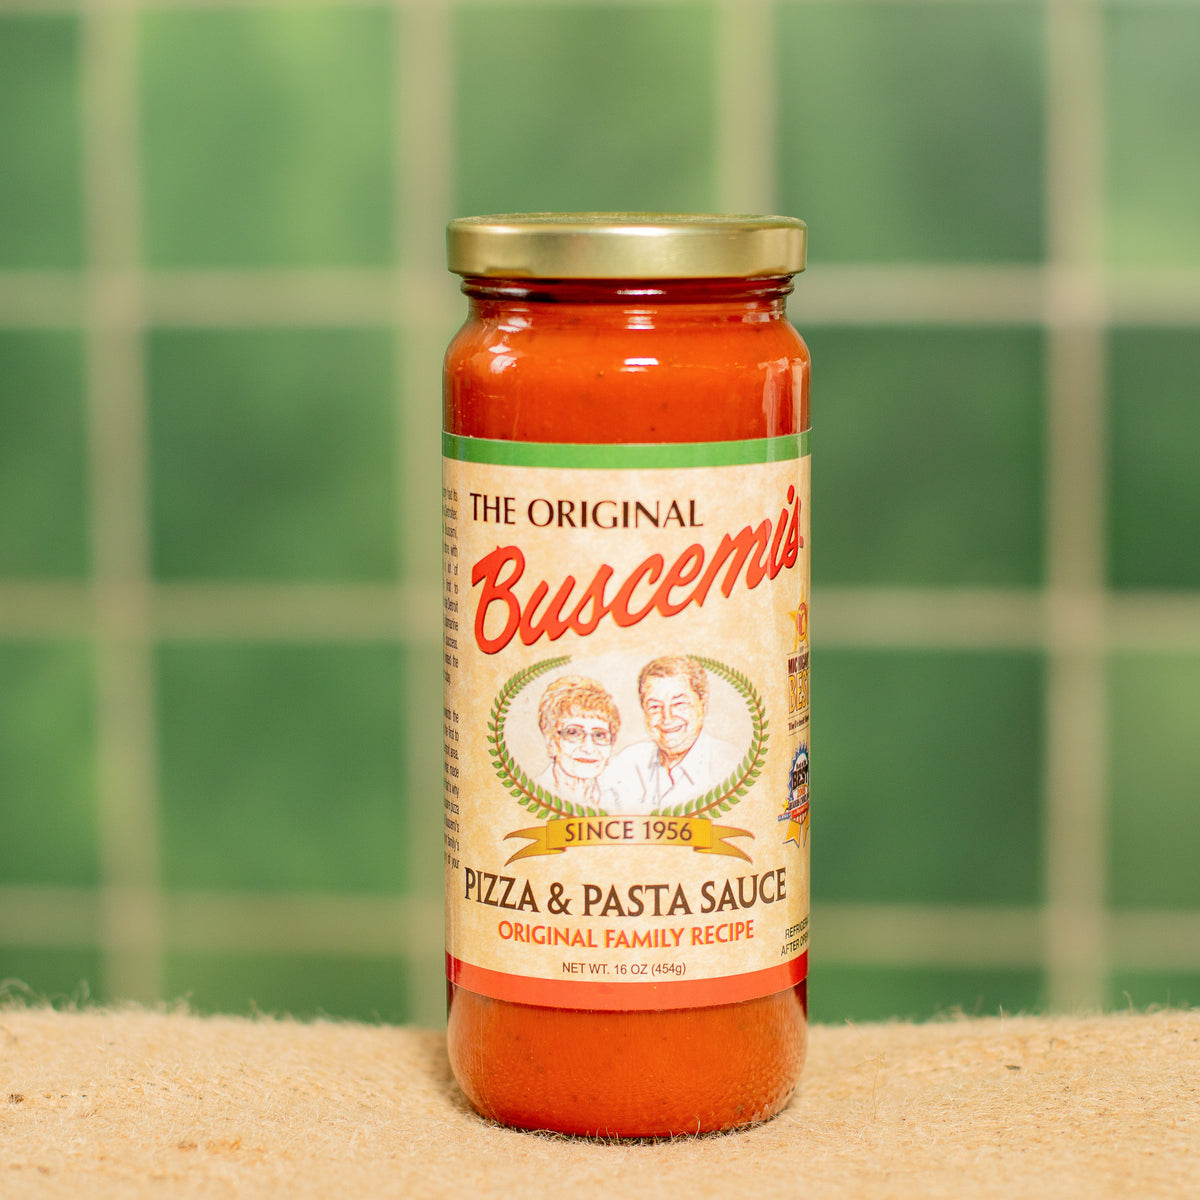 Buscemis Pizza and Pasta Sauce